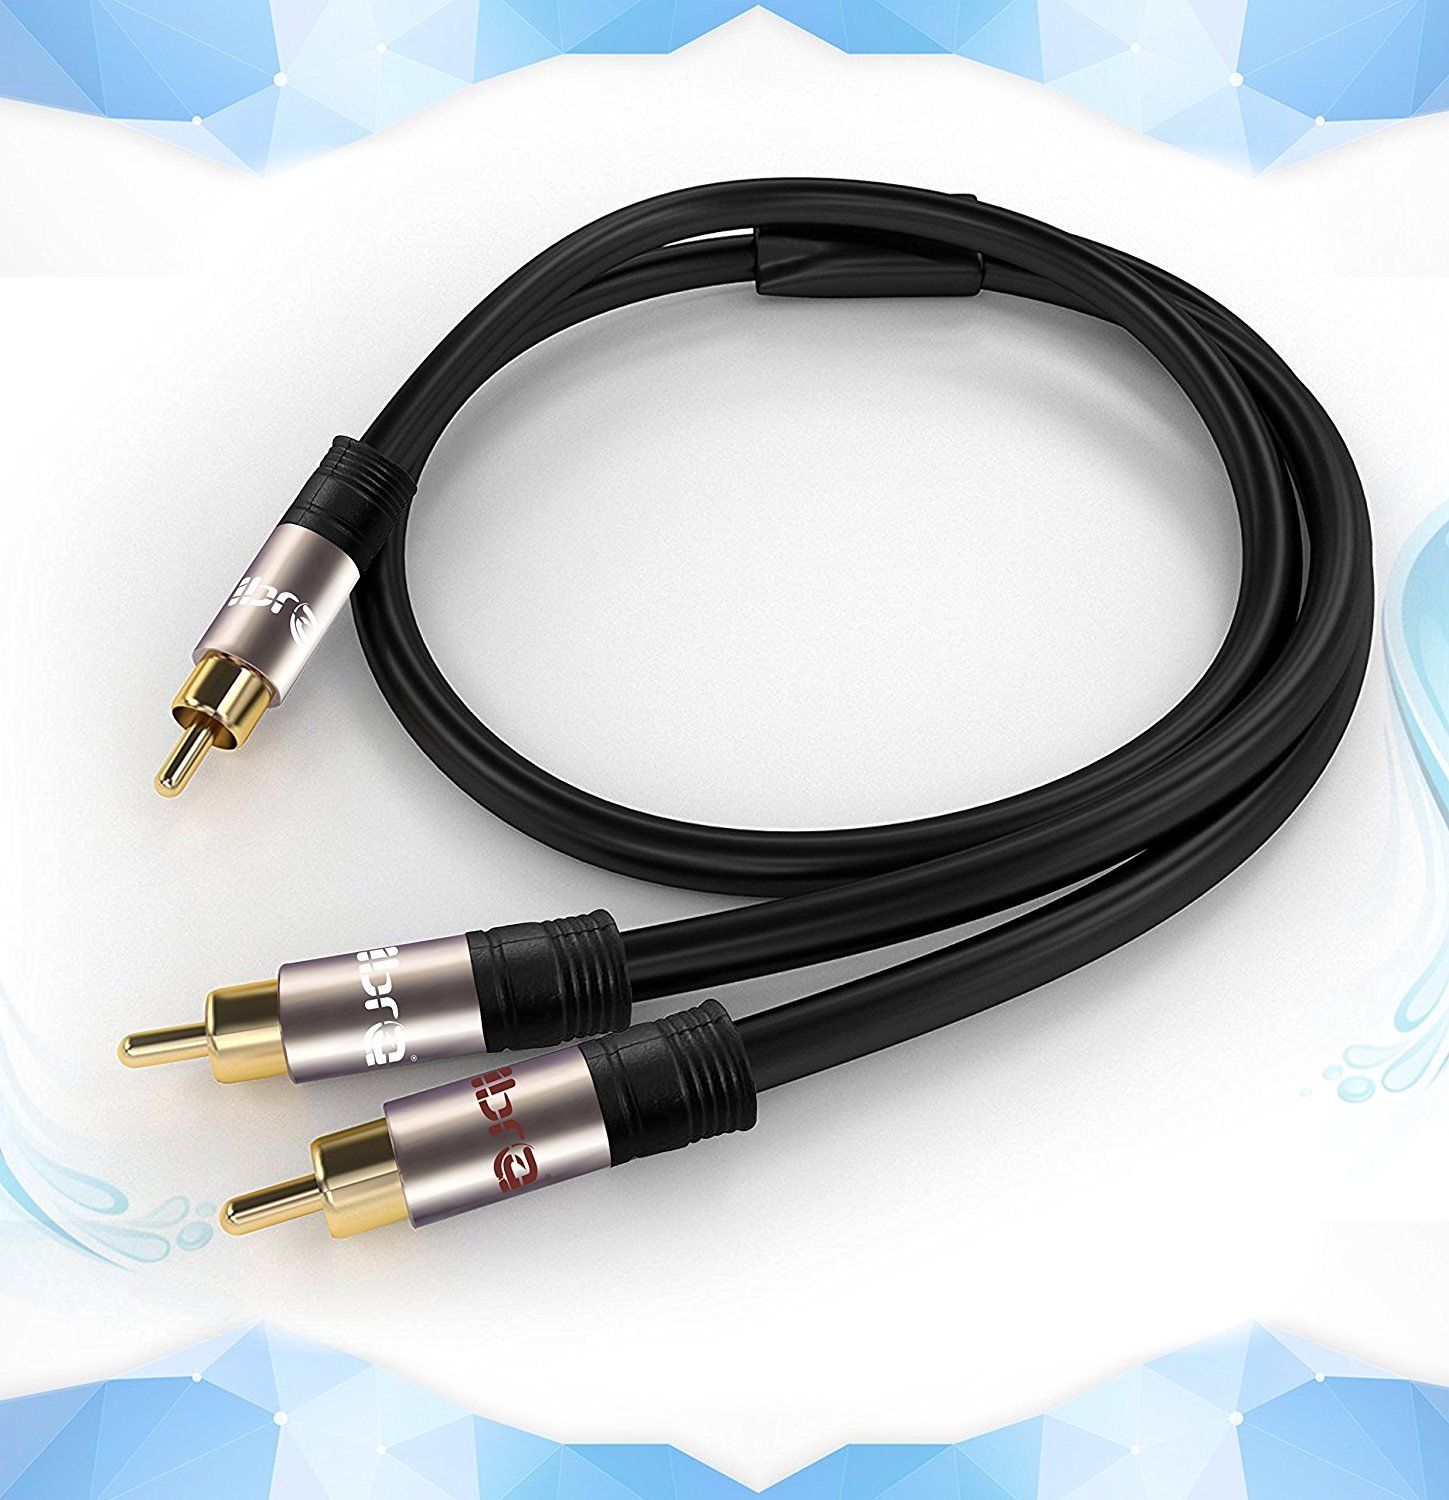 IBRA 2M Y Cable / Subwoofer Cable / Audio Cable / RCA Cable (1 x RCA to 2 x RCA) - GUN Metal Range